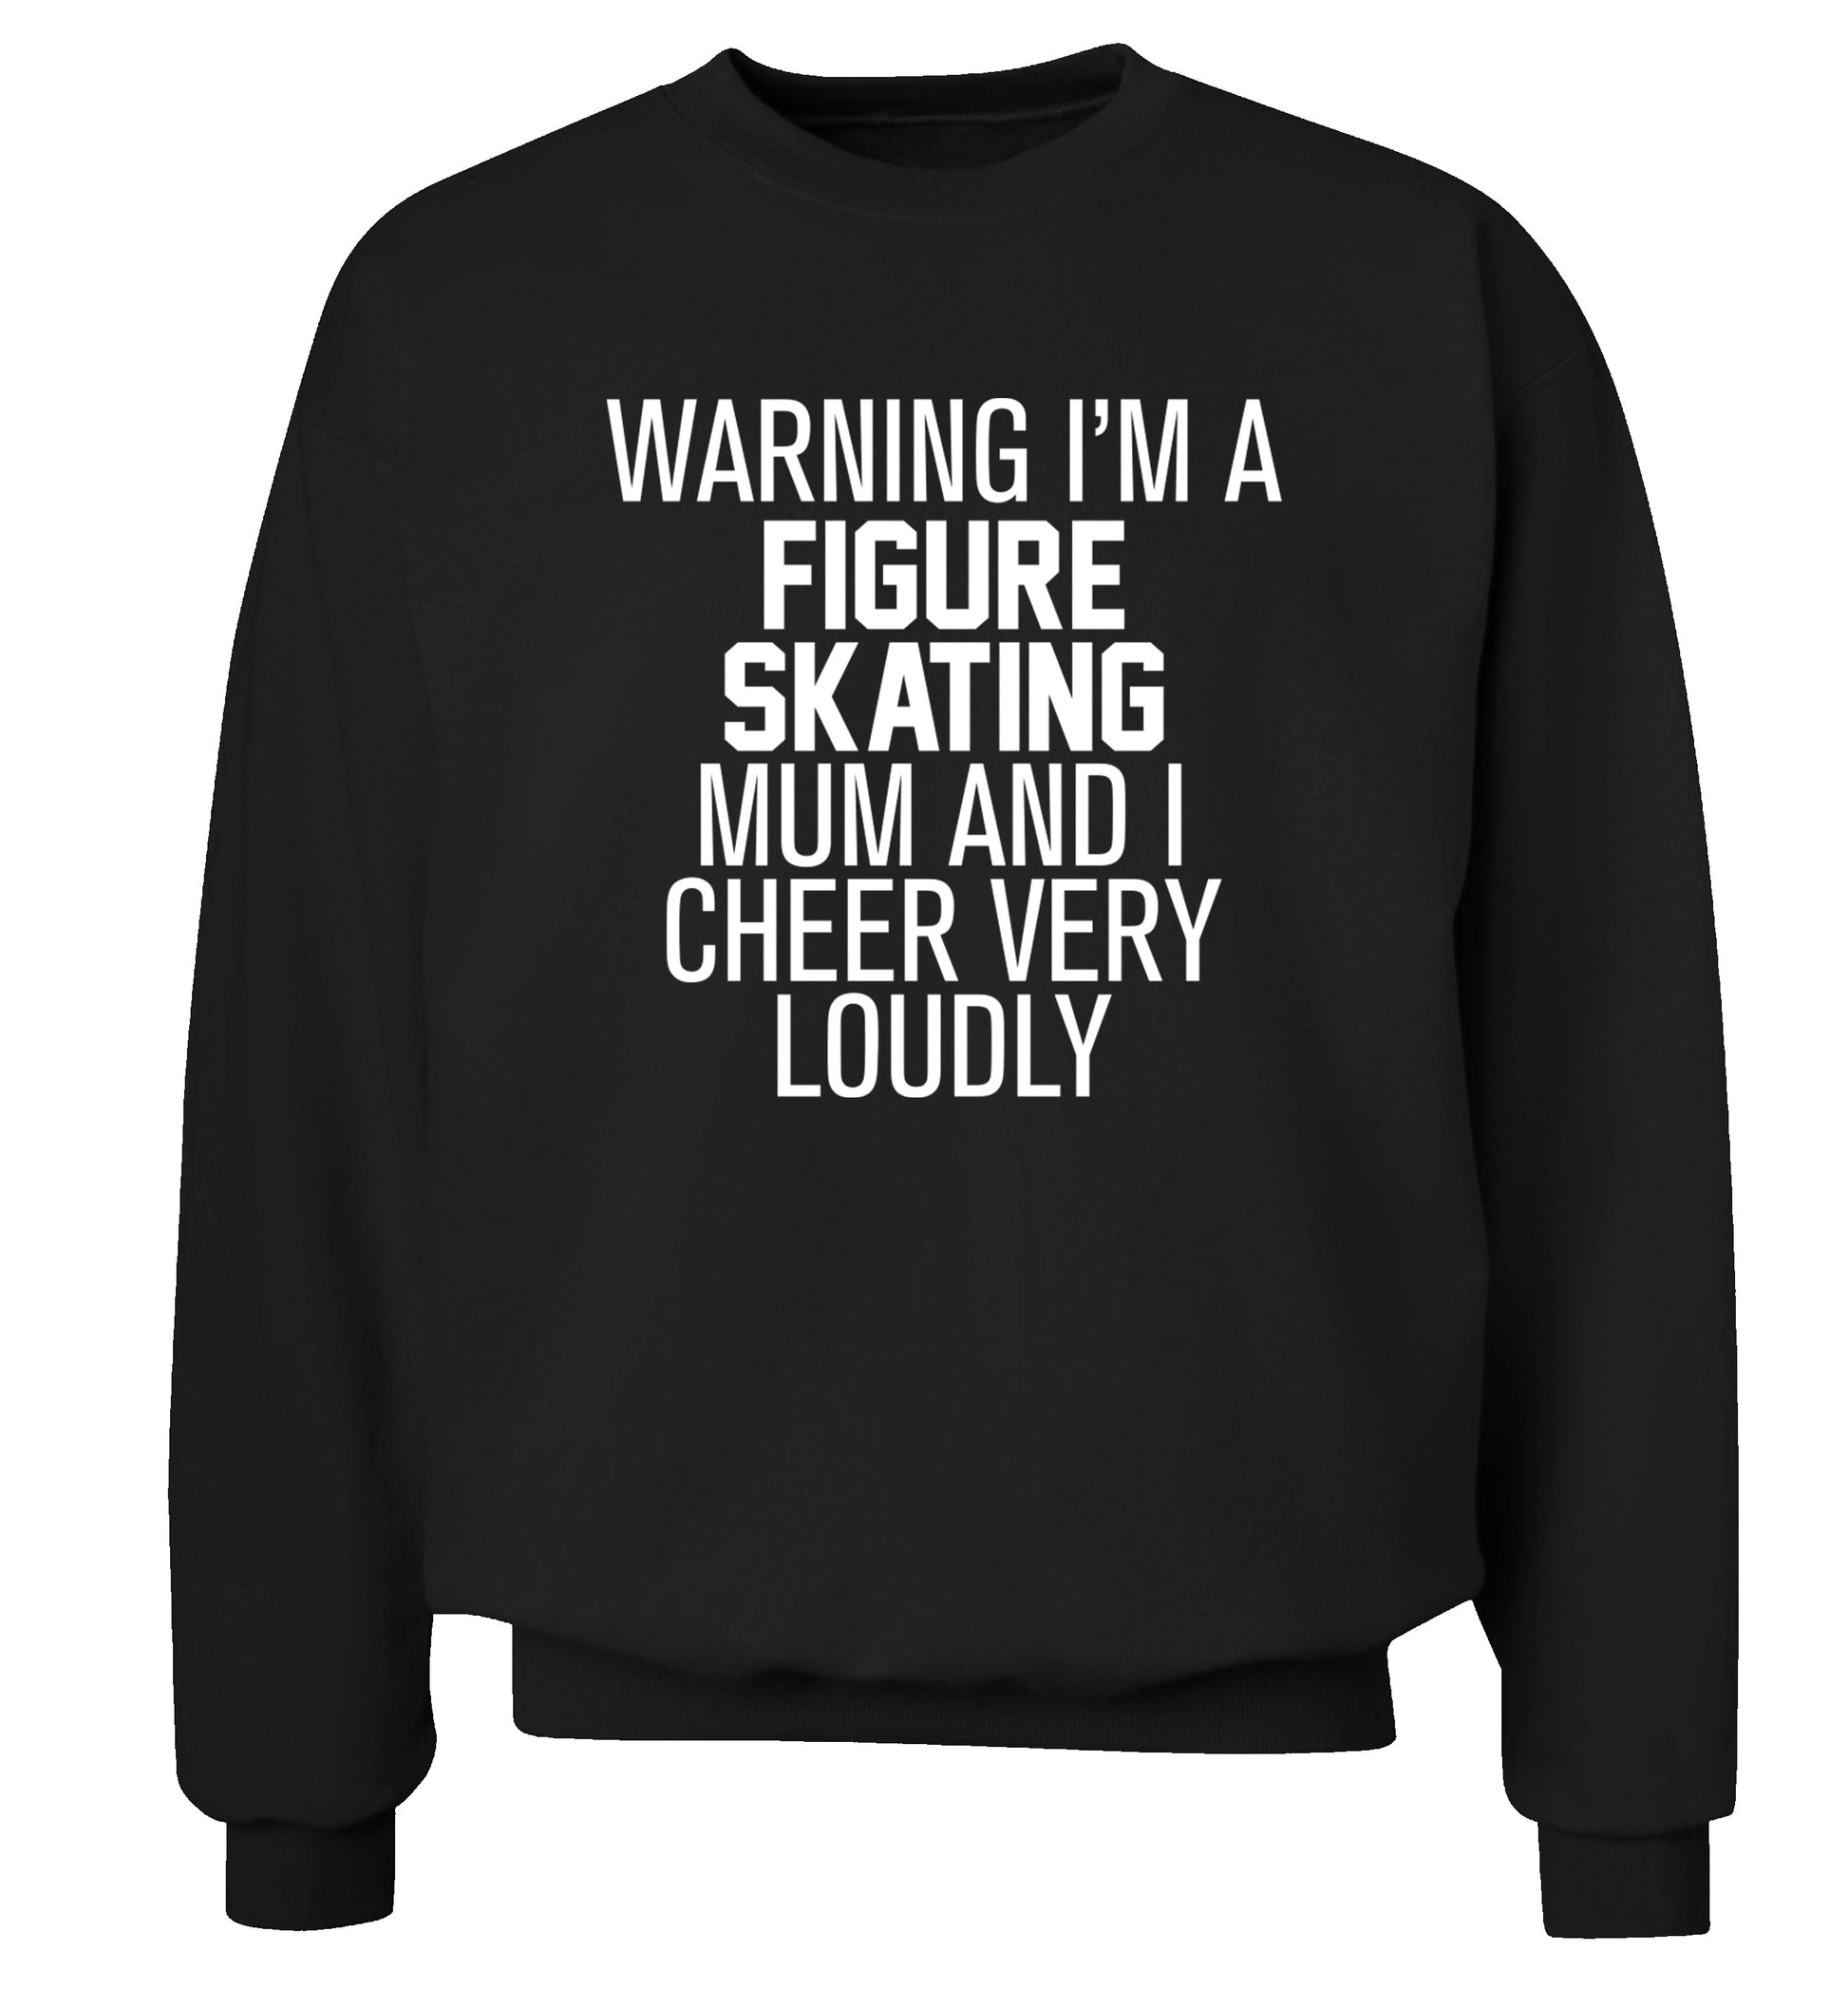 Warning I'm a figure skating mum and I cheer very loudly Adult's unisexblack Sweater 2XL